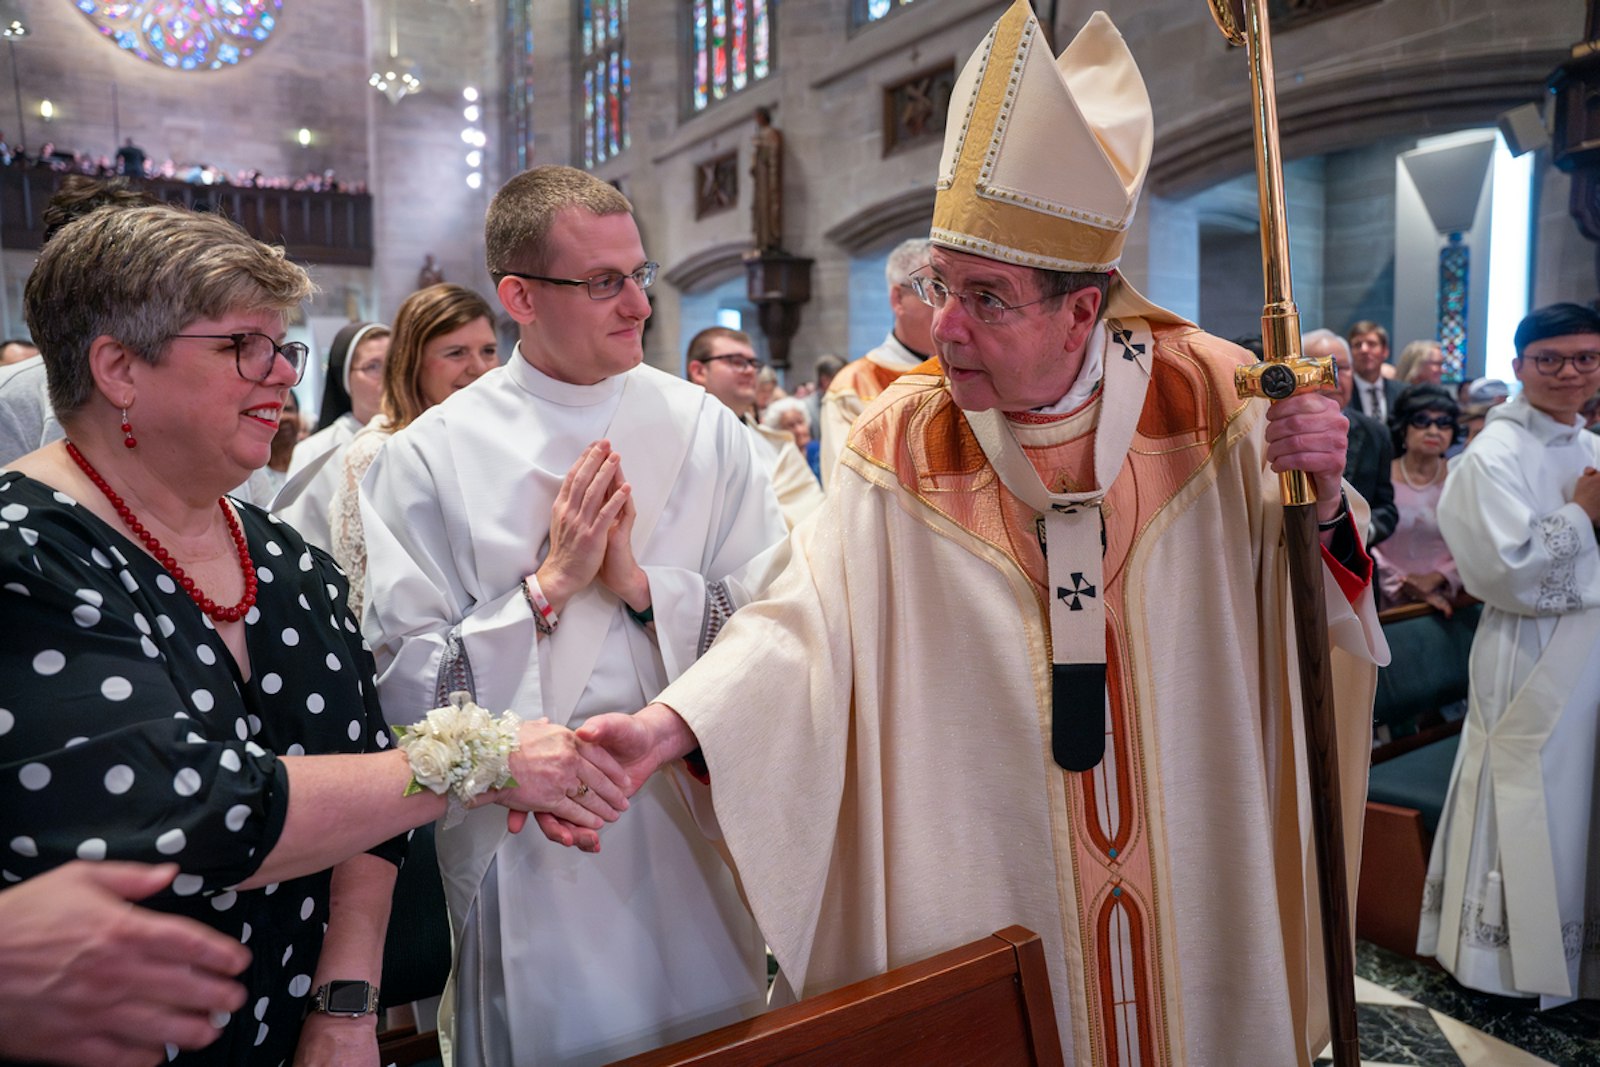 Archbishop Vigneron shakes the hand of Kris Kurt, the mother of Fr. Matthew Kurt, middle, as he processes into the cathedral before the ordination rite.